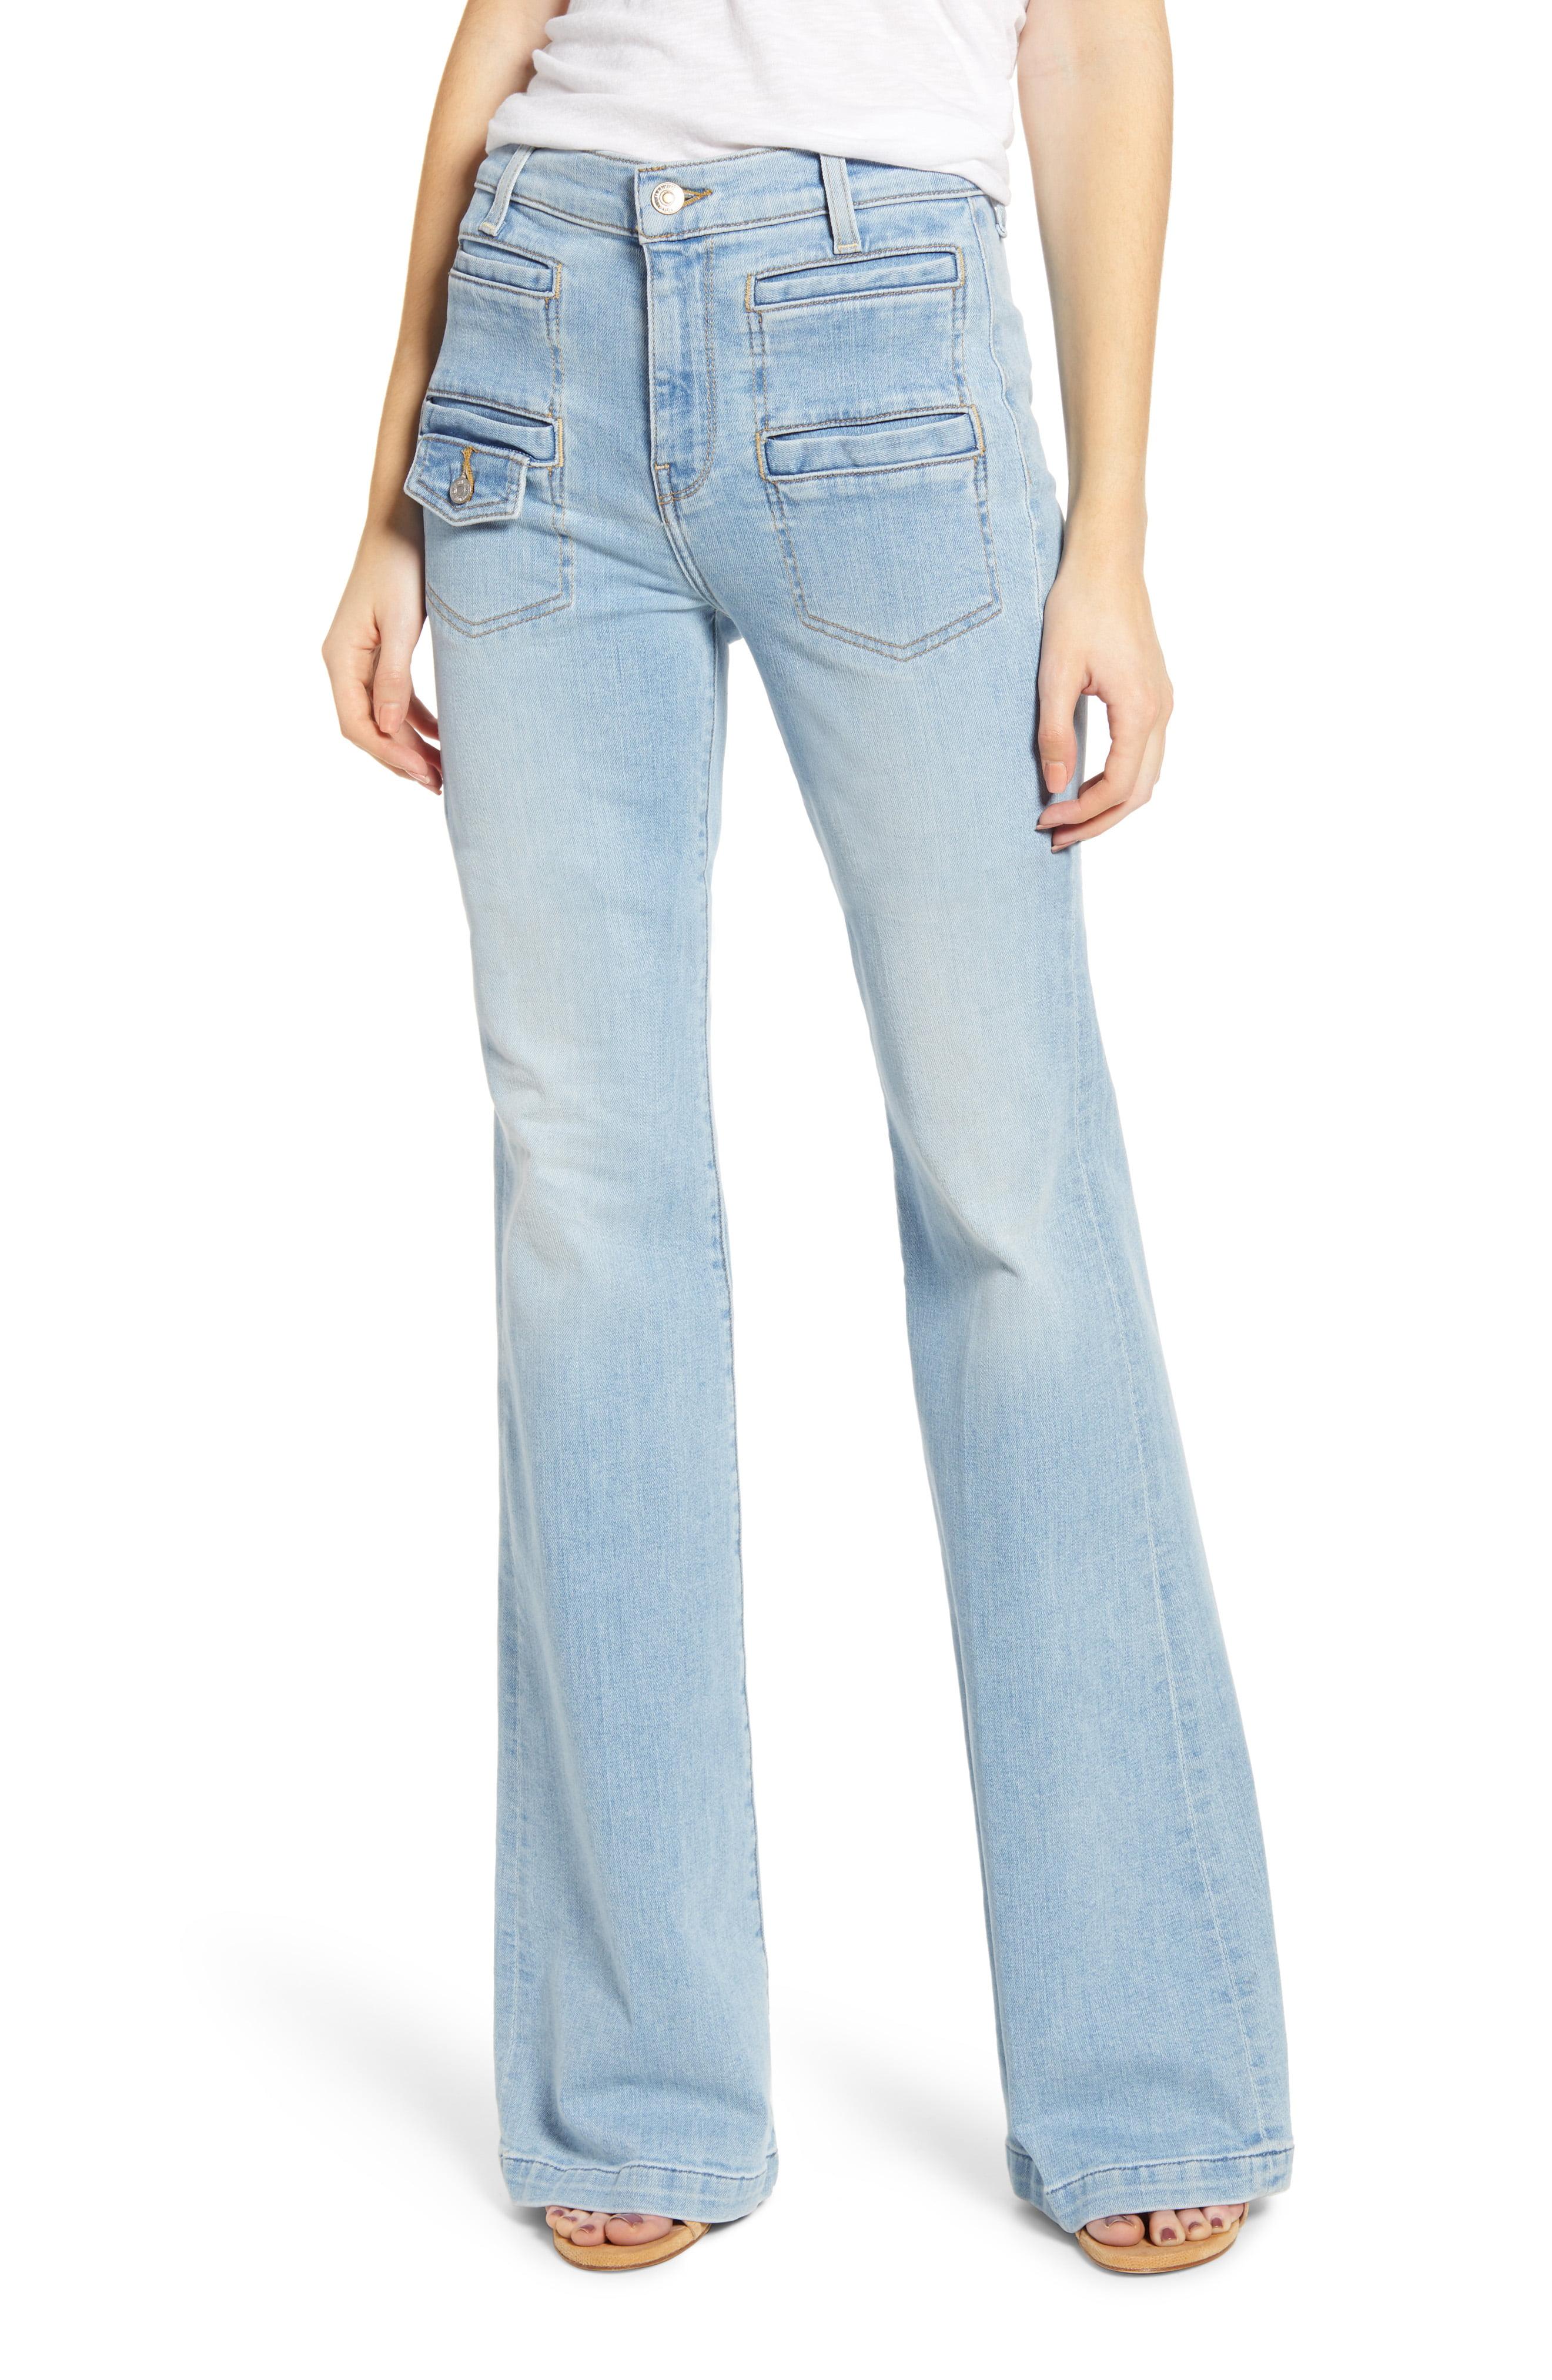 Lyst - 7 For All Mankind 7 For All Mankind Georgia High Waist Flare ...